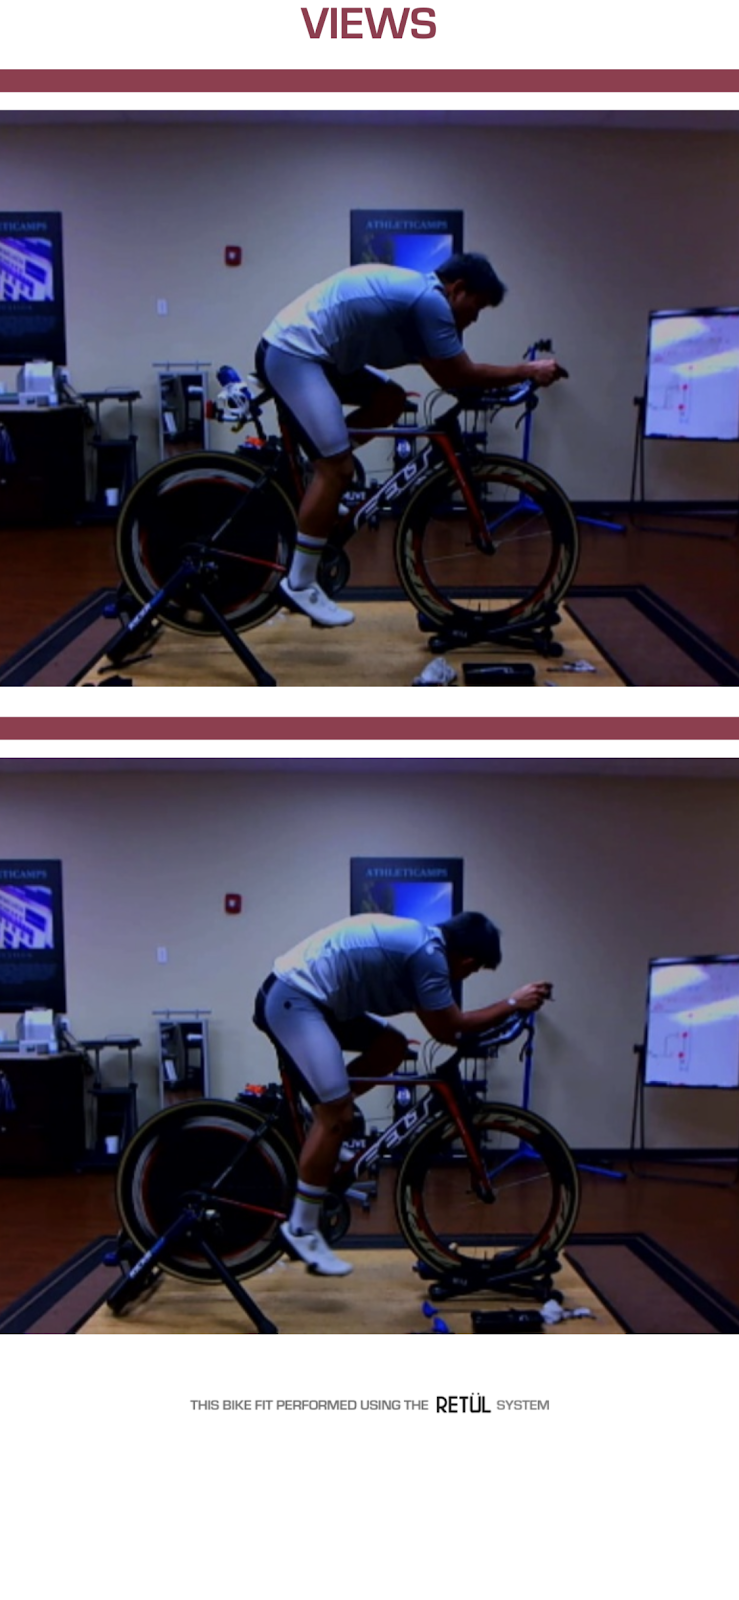 Athleticamps Bike Fitting, Coaching, and Travel | 7700 Folsom-Auburn Rd Suite 130, Folsom, CA 95630, USA | Phone: (916) 932-0112